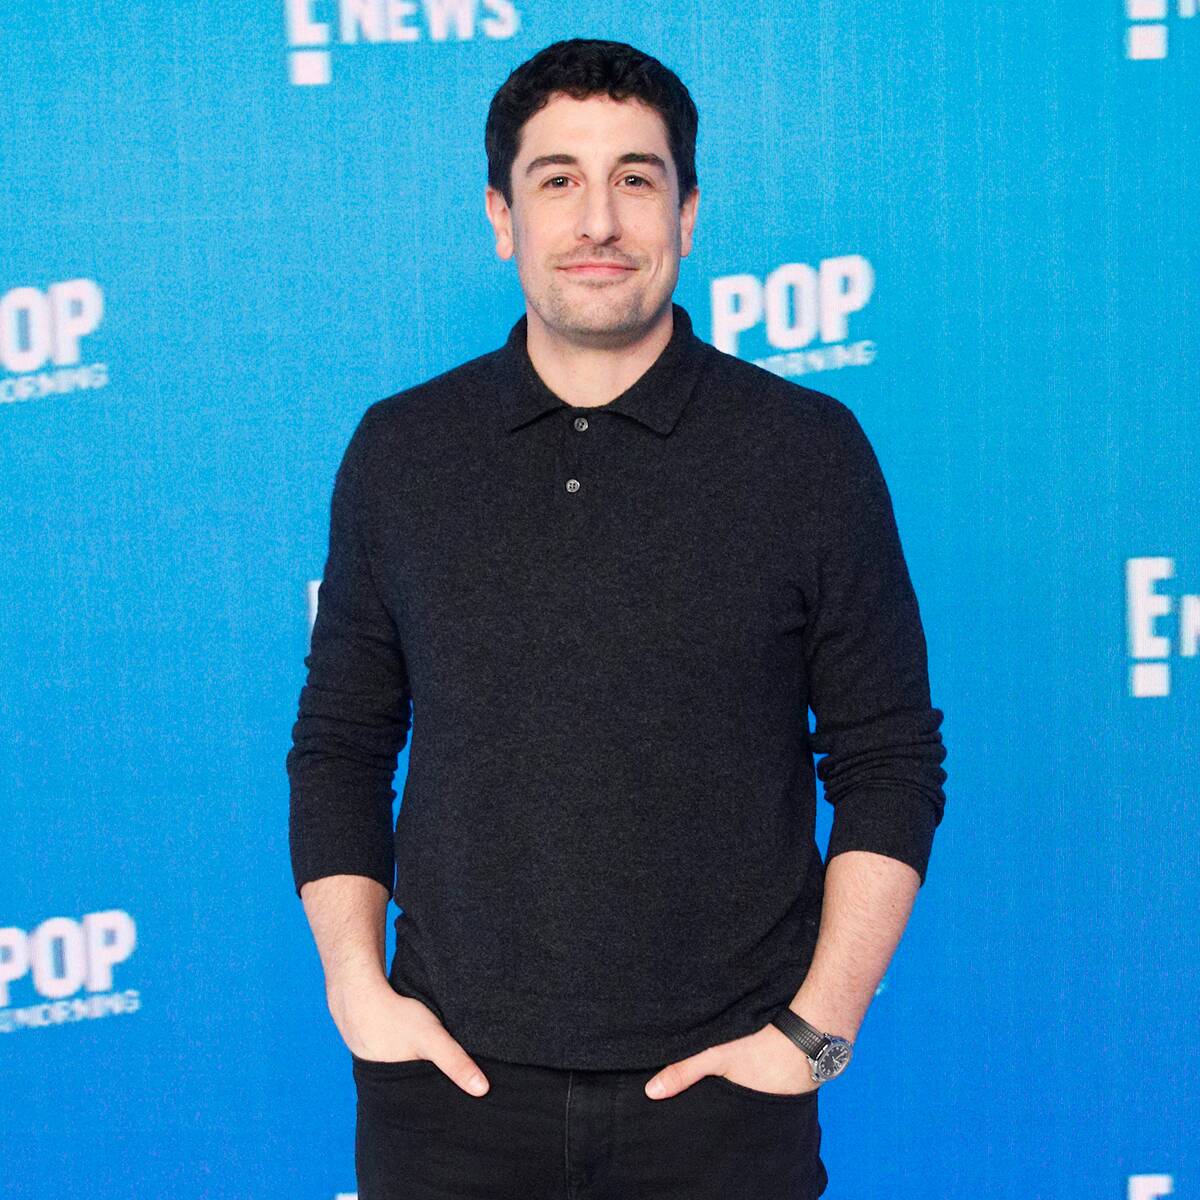 Jason Biggs Says His "Biggest Regret" Was Turning Down How I Met Your Mother